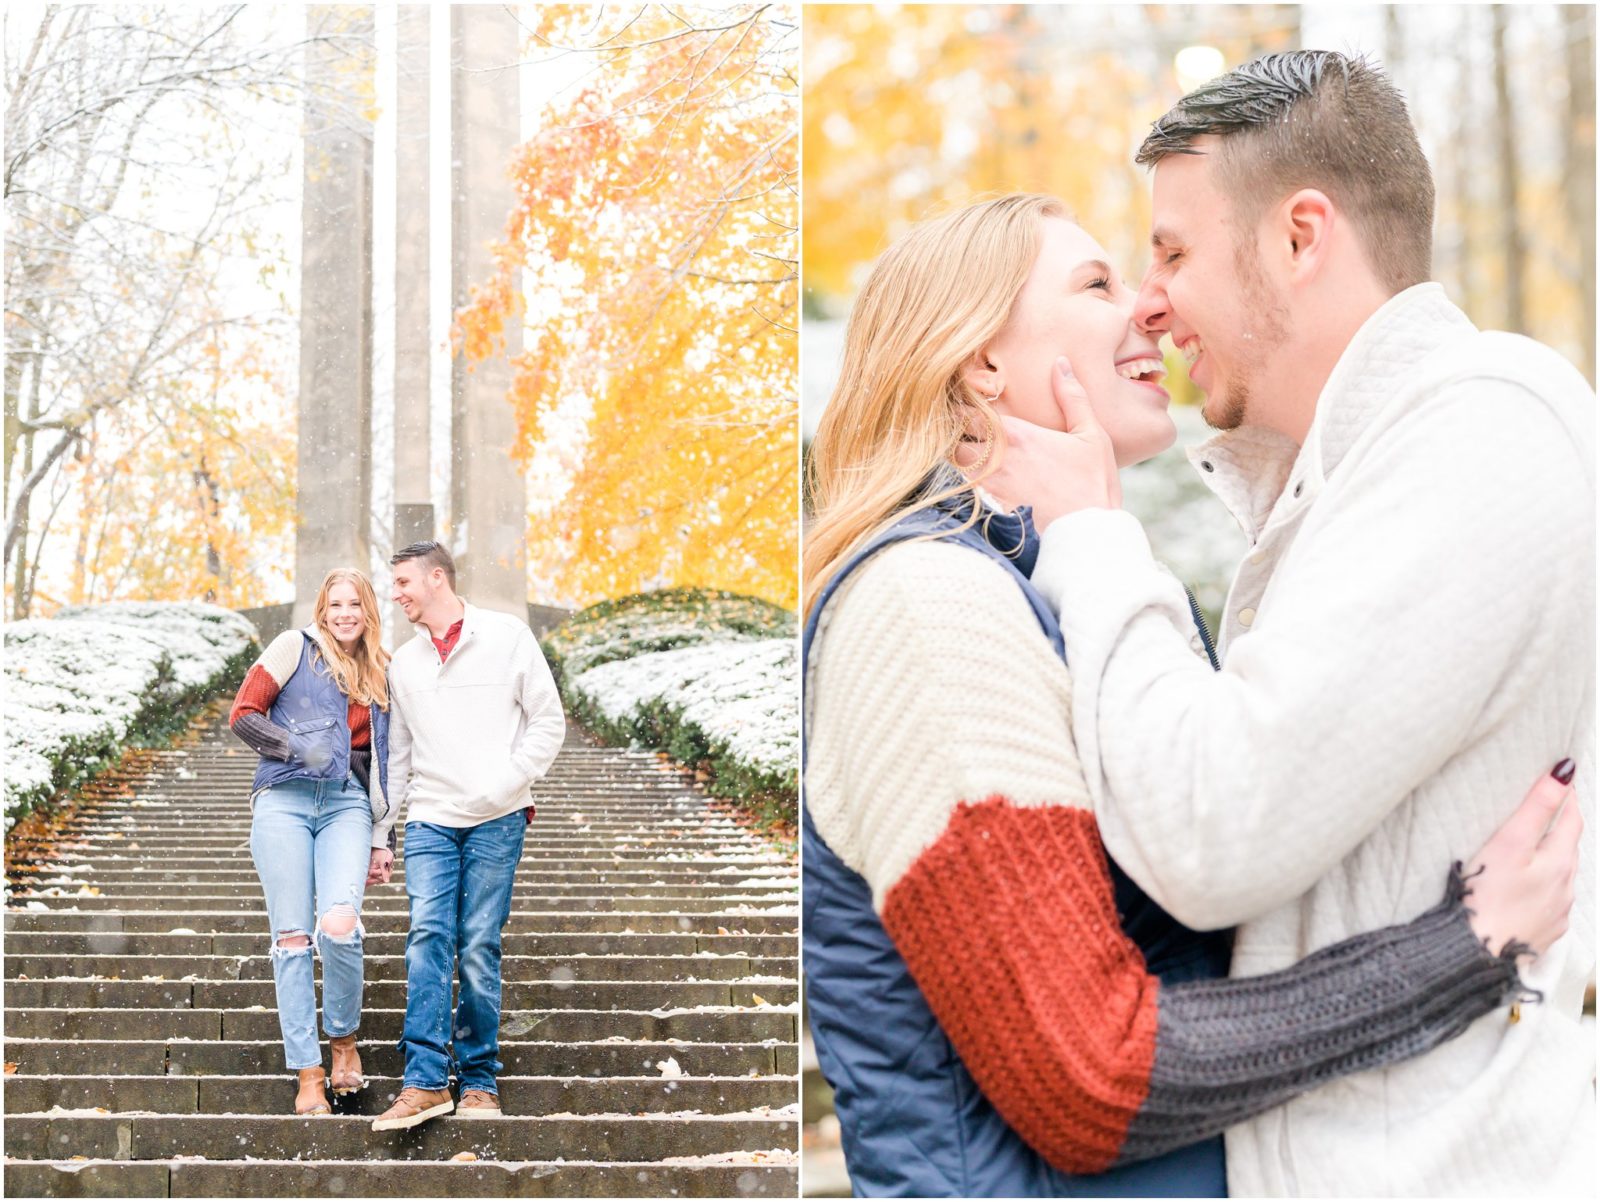 Laugh kiss Holcomb Gardens engagement session in the snow